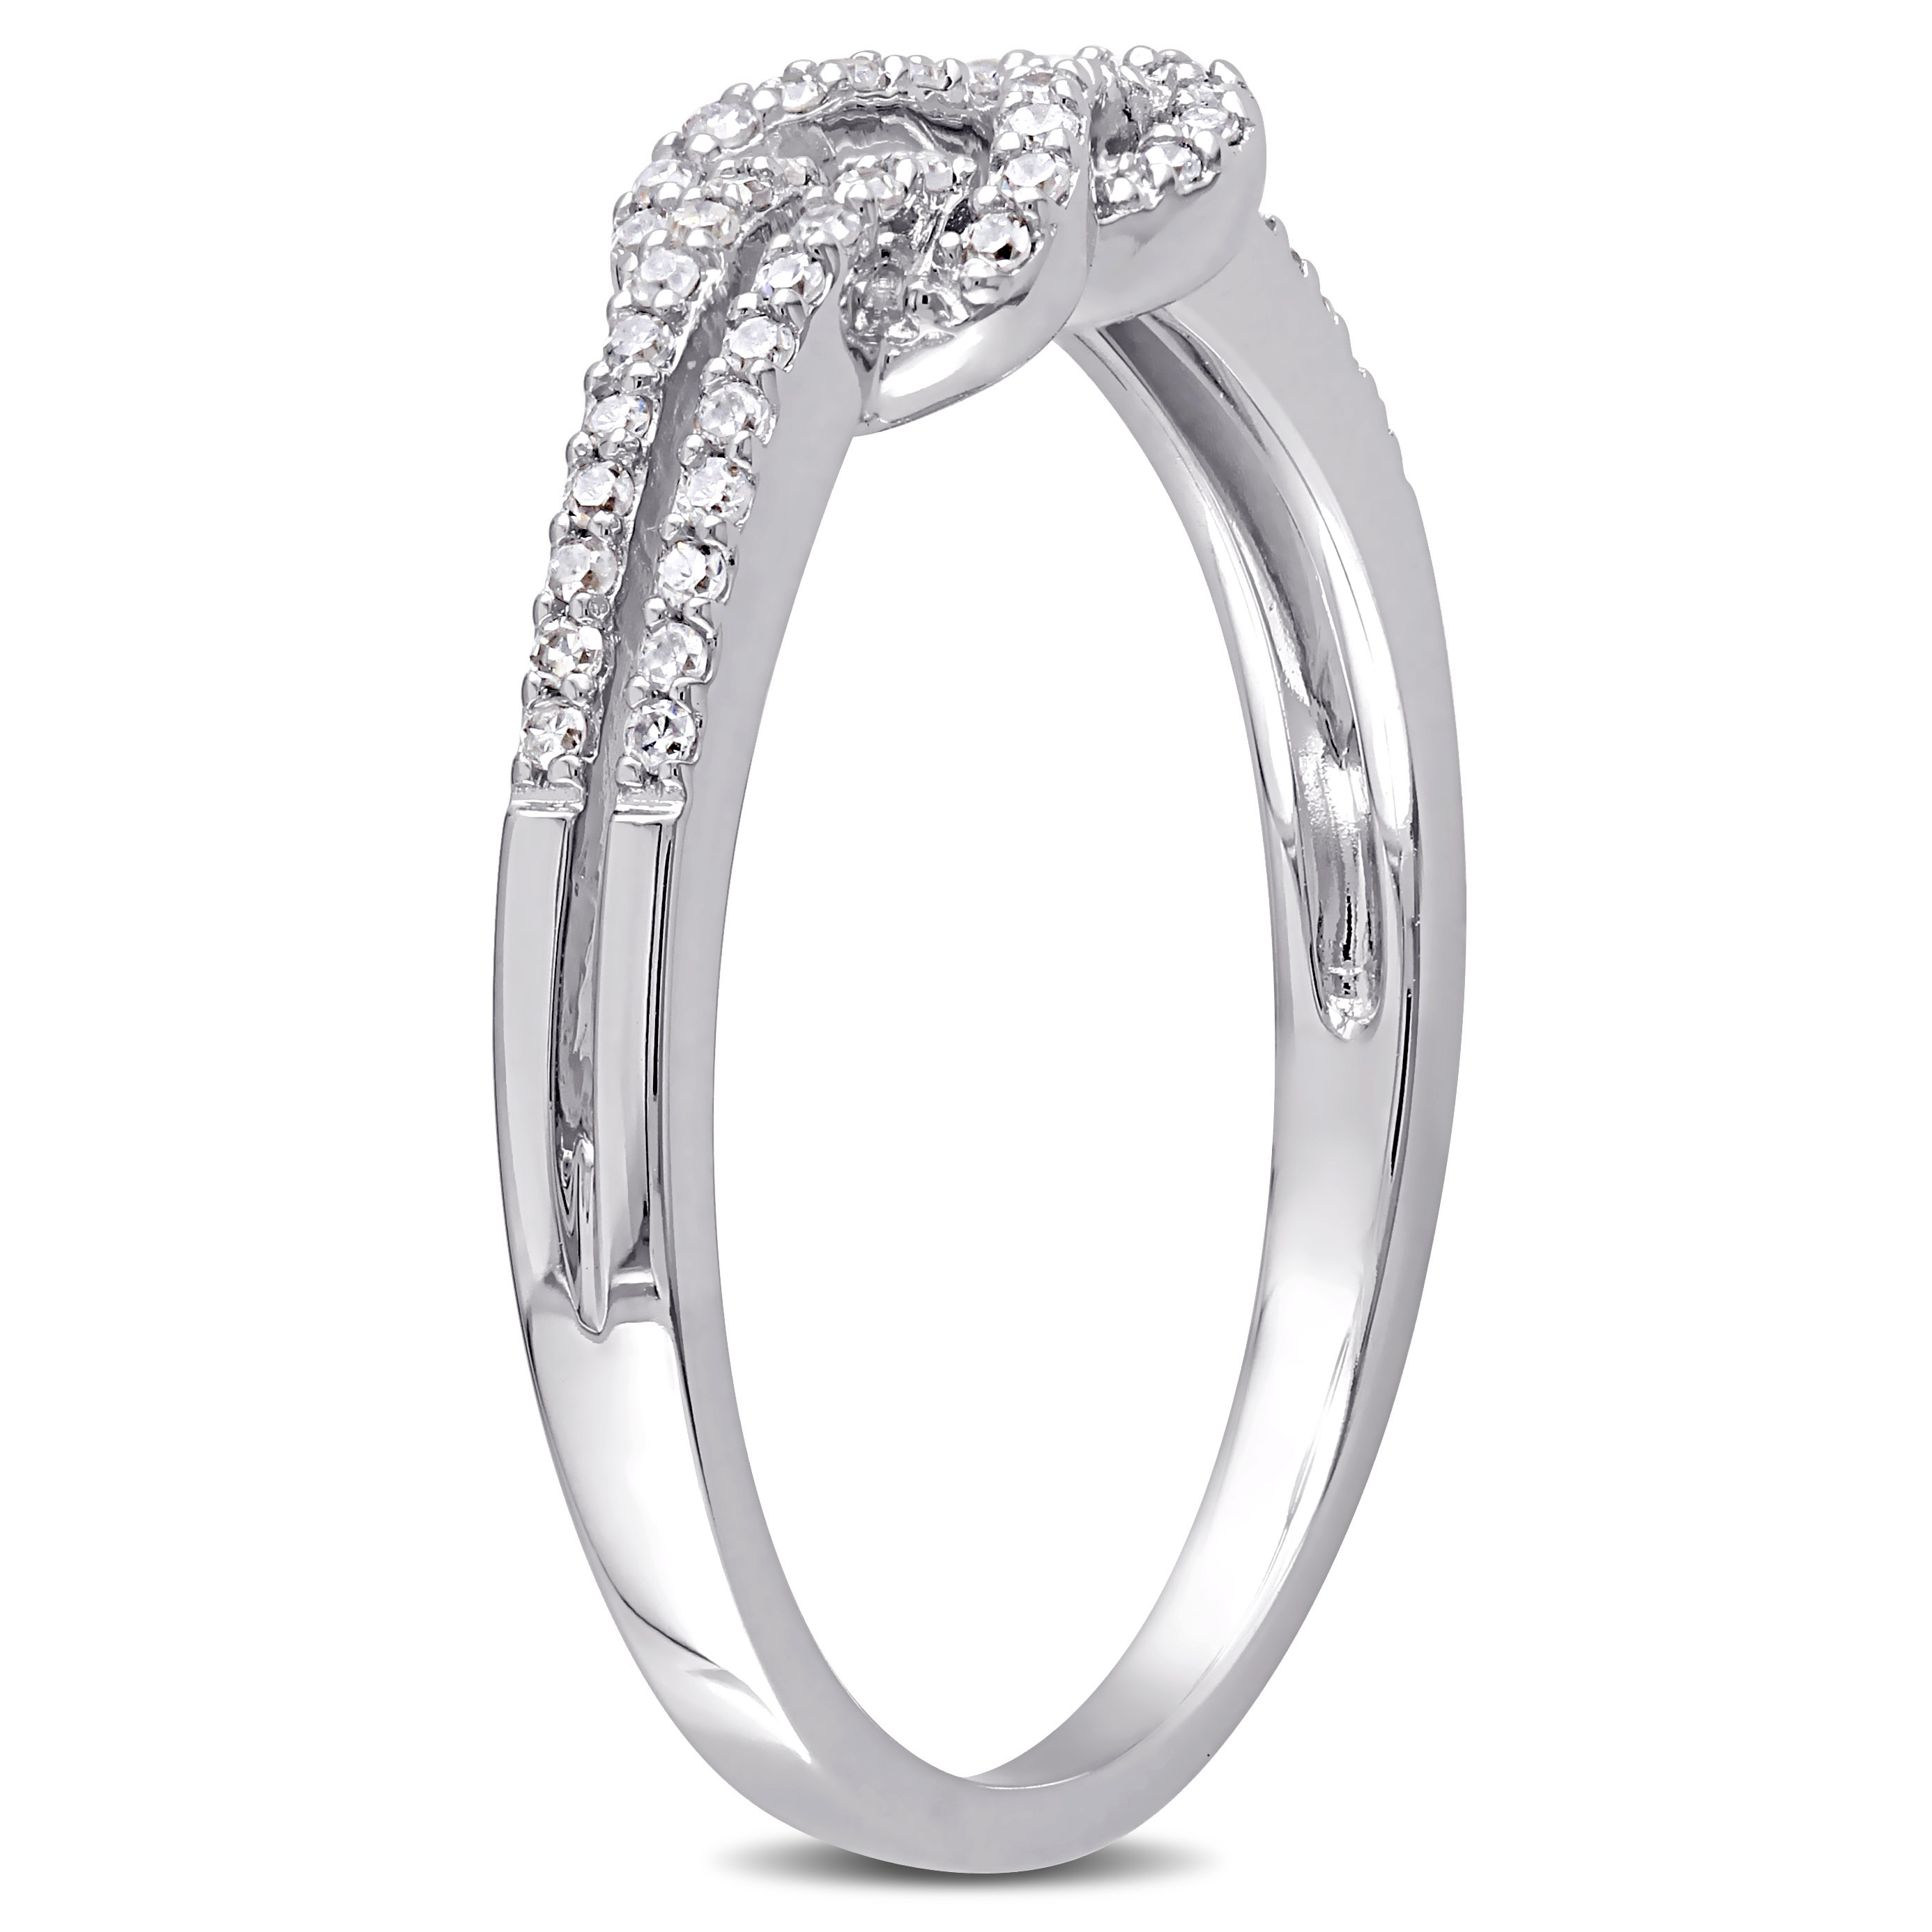 1/6 CT TW Diamond Double Knot Ring in 14k White Gold